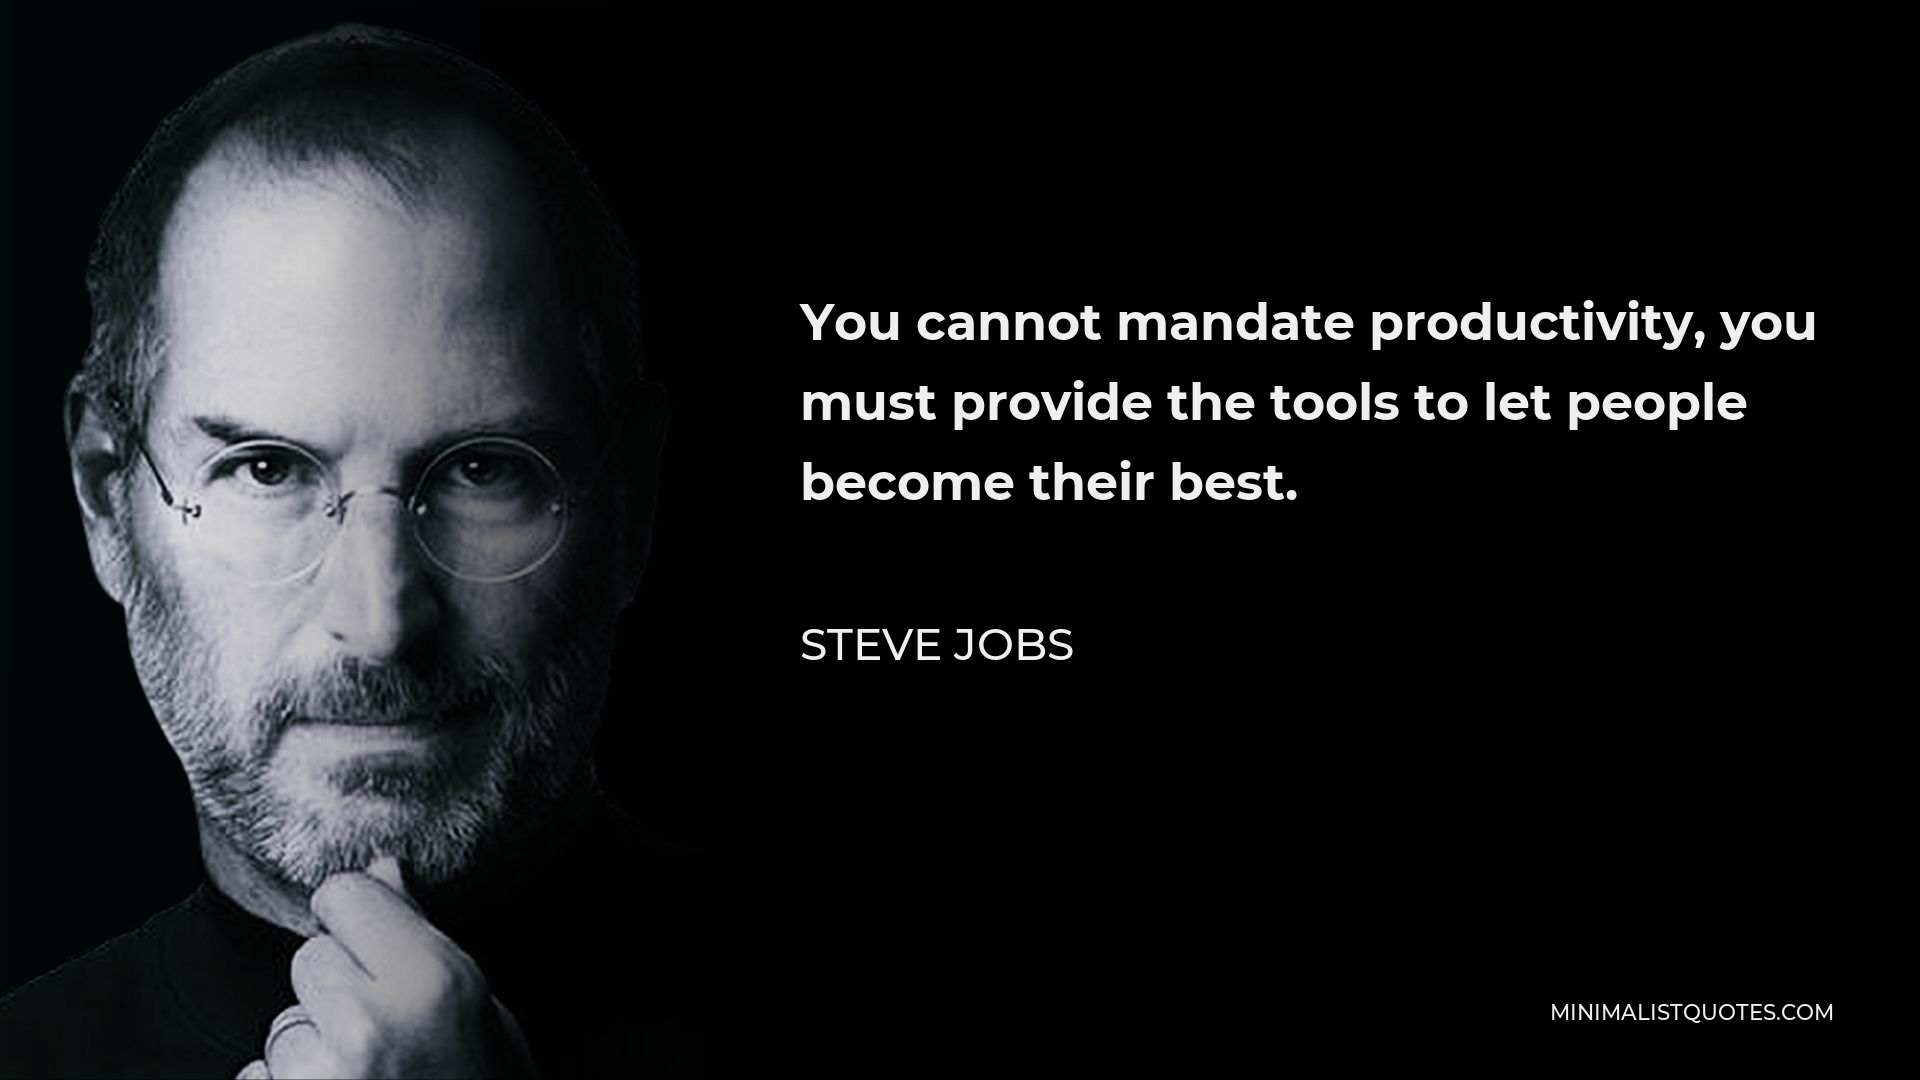 Steve Jobs Quote - You cannot mandate productivity, you must provide the tools to let people become their best.